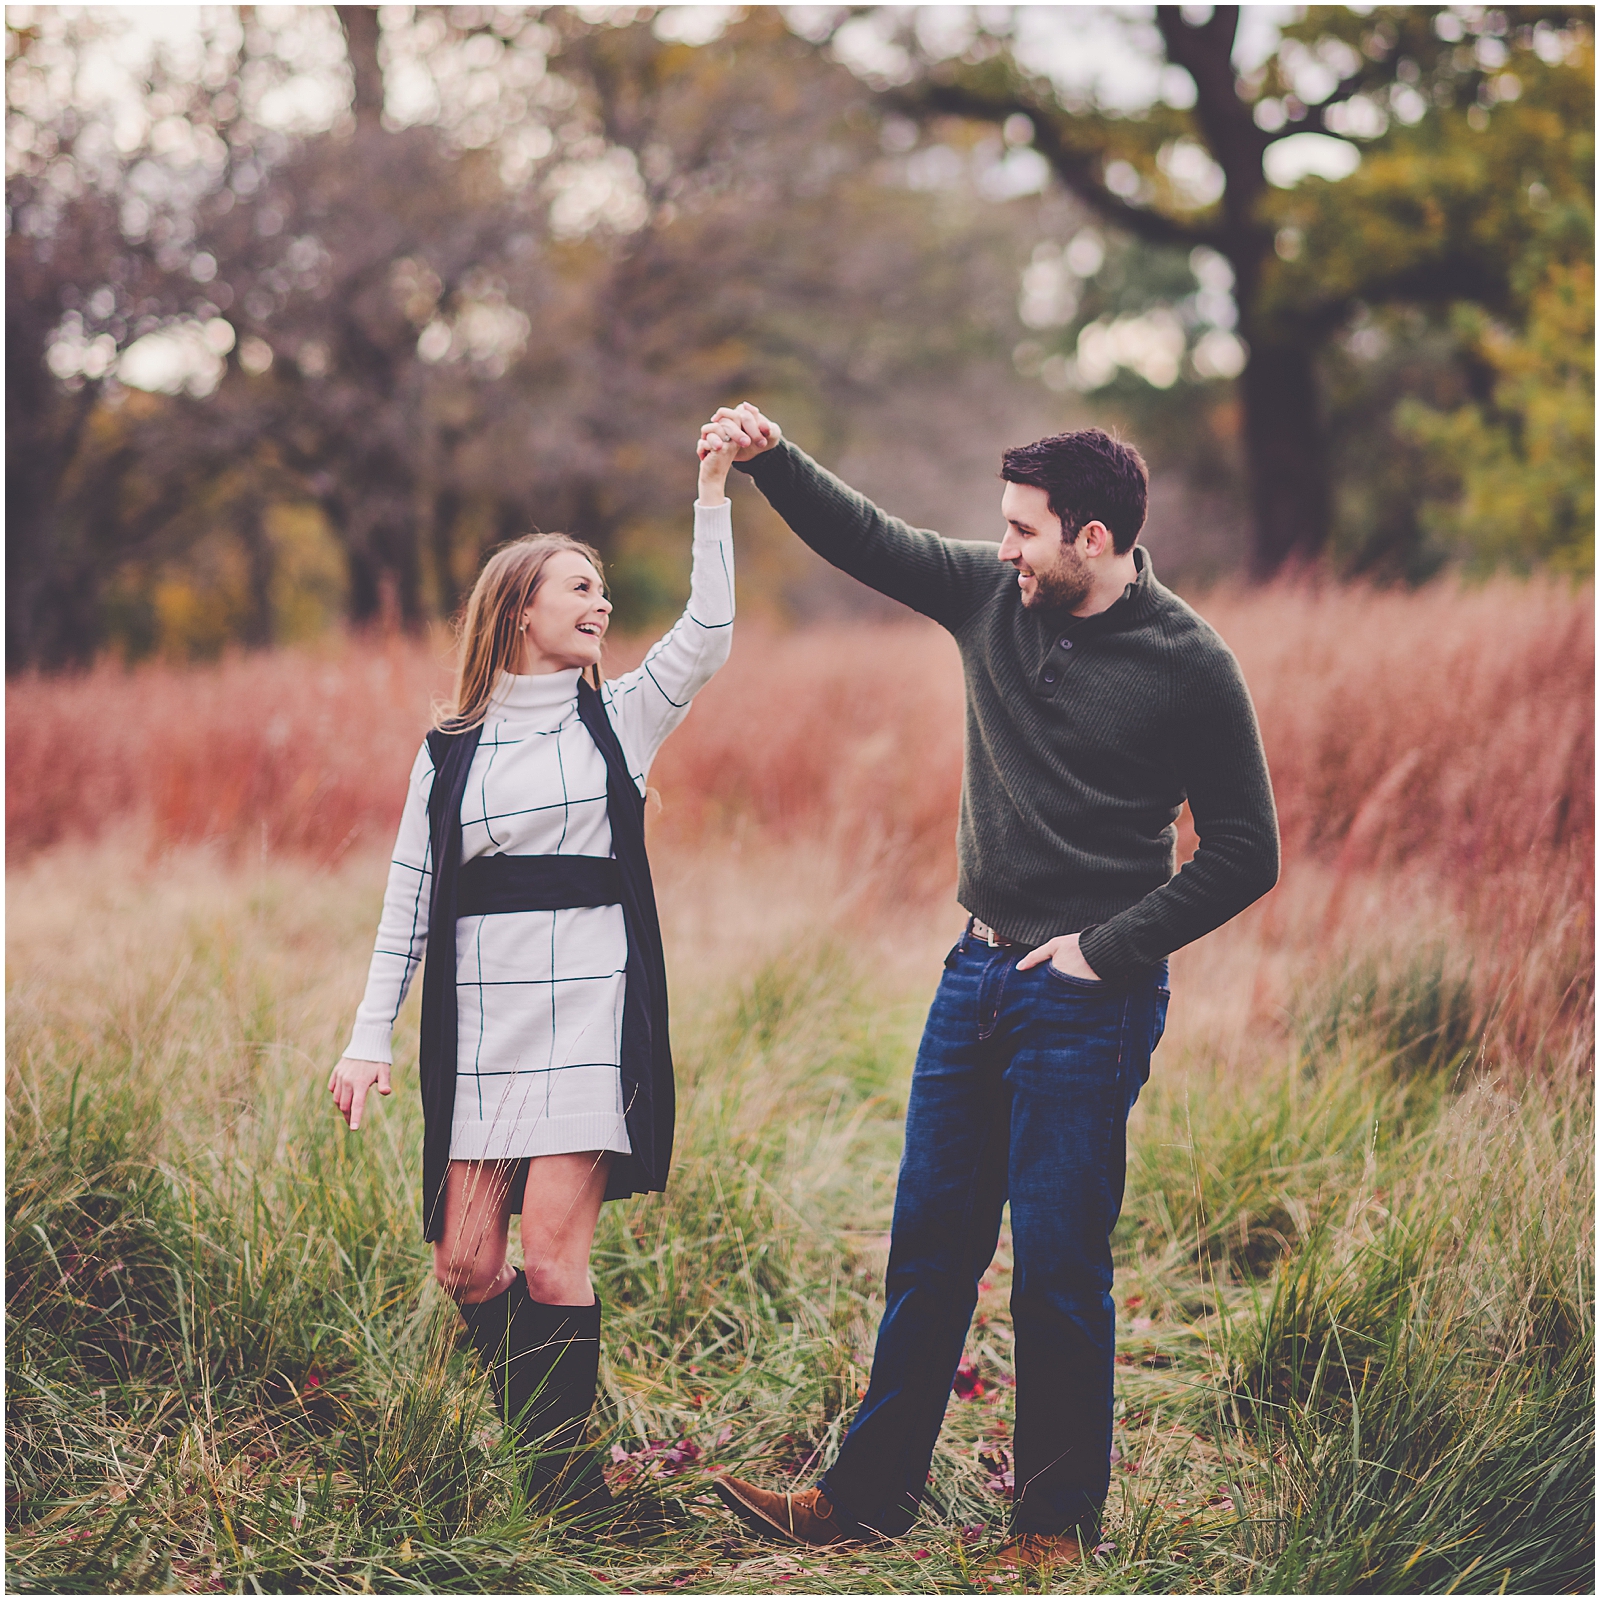 Engagements of 2019 recap with Kara Evans Photographer - engagement photos in Chicagoland and Central Illinois with Kara Evans.